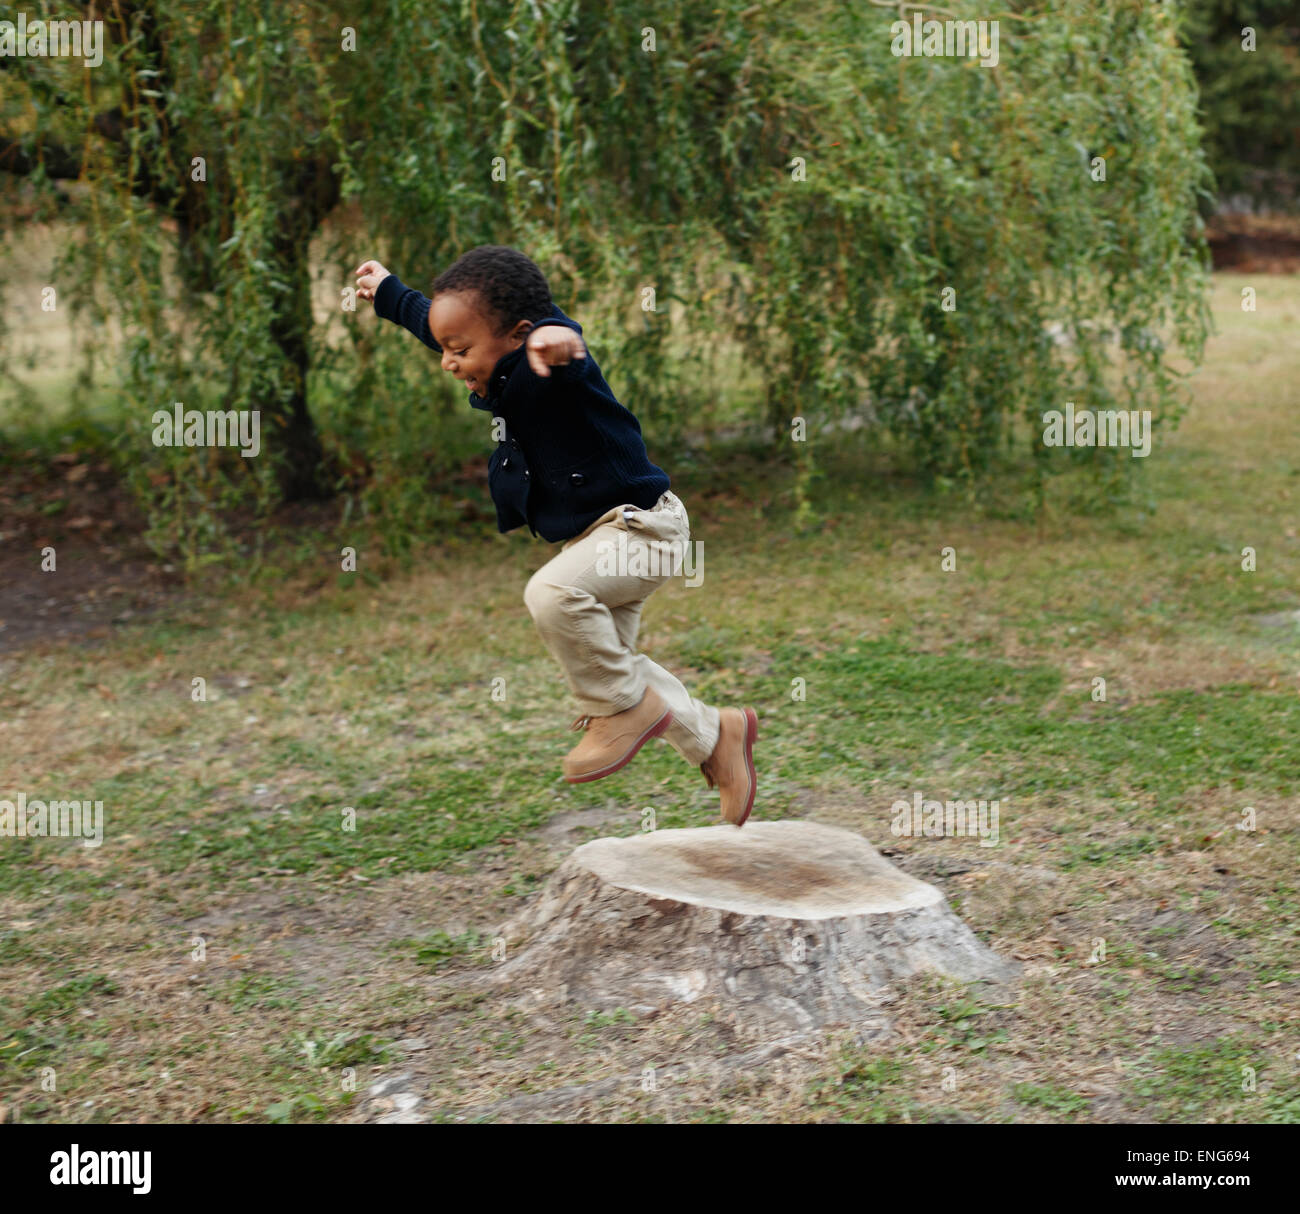 African American boy playing on stump in park Stock Photo